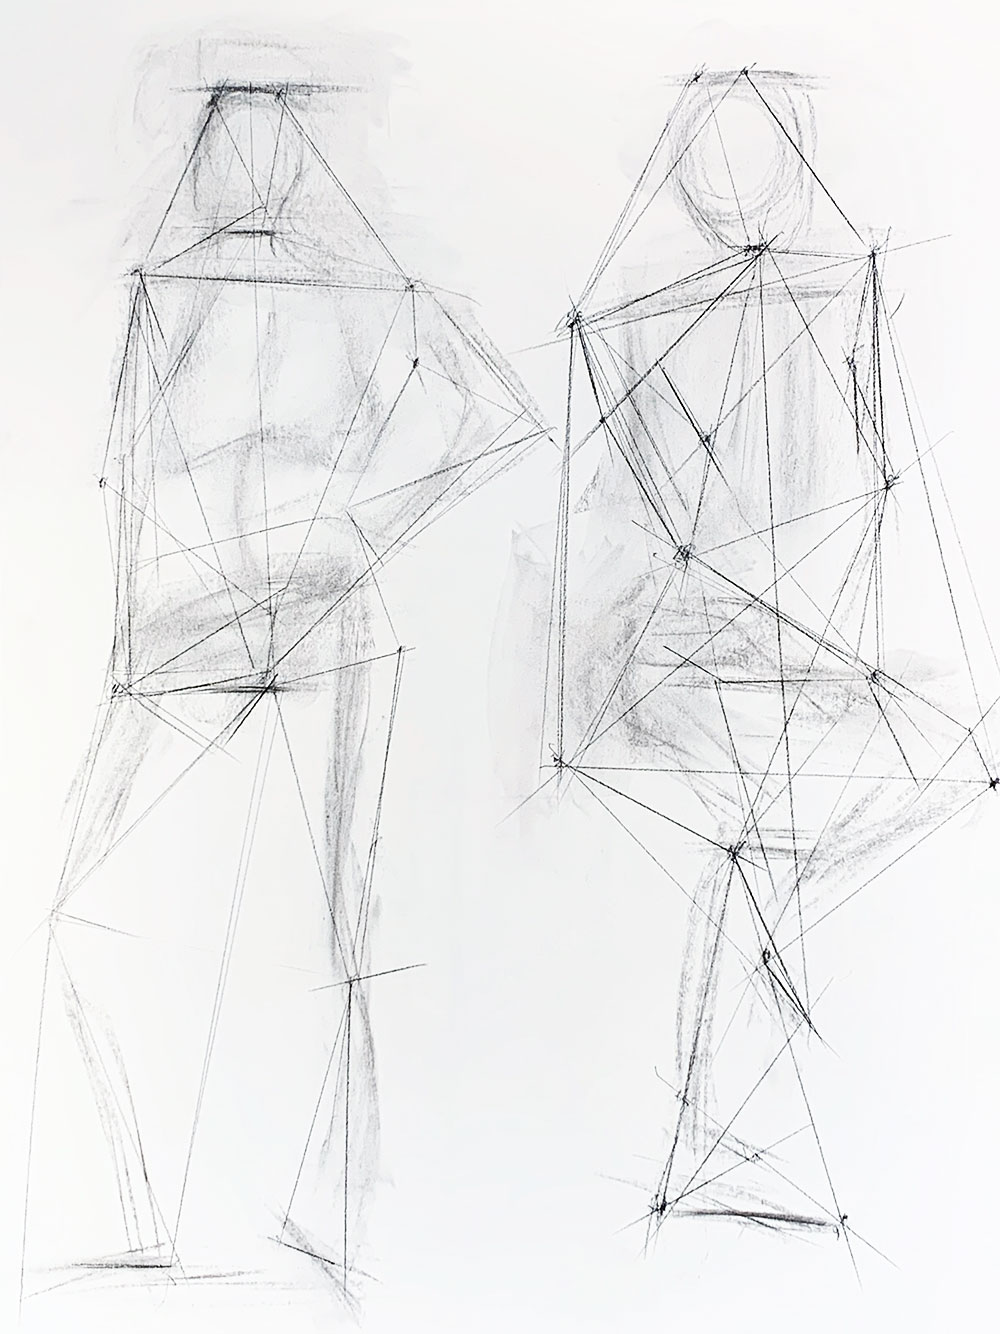 A figurative drawing composed of several lines, outlining the gesture figure of a human, drawn in vine charcoal.